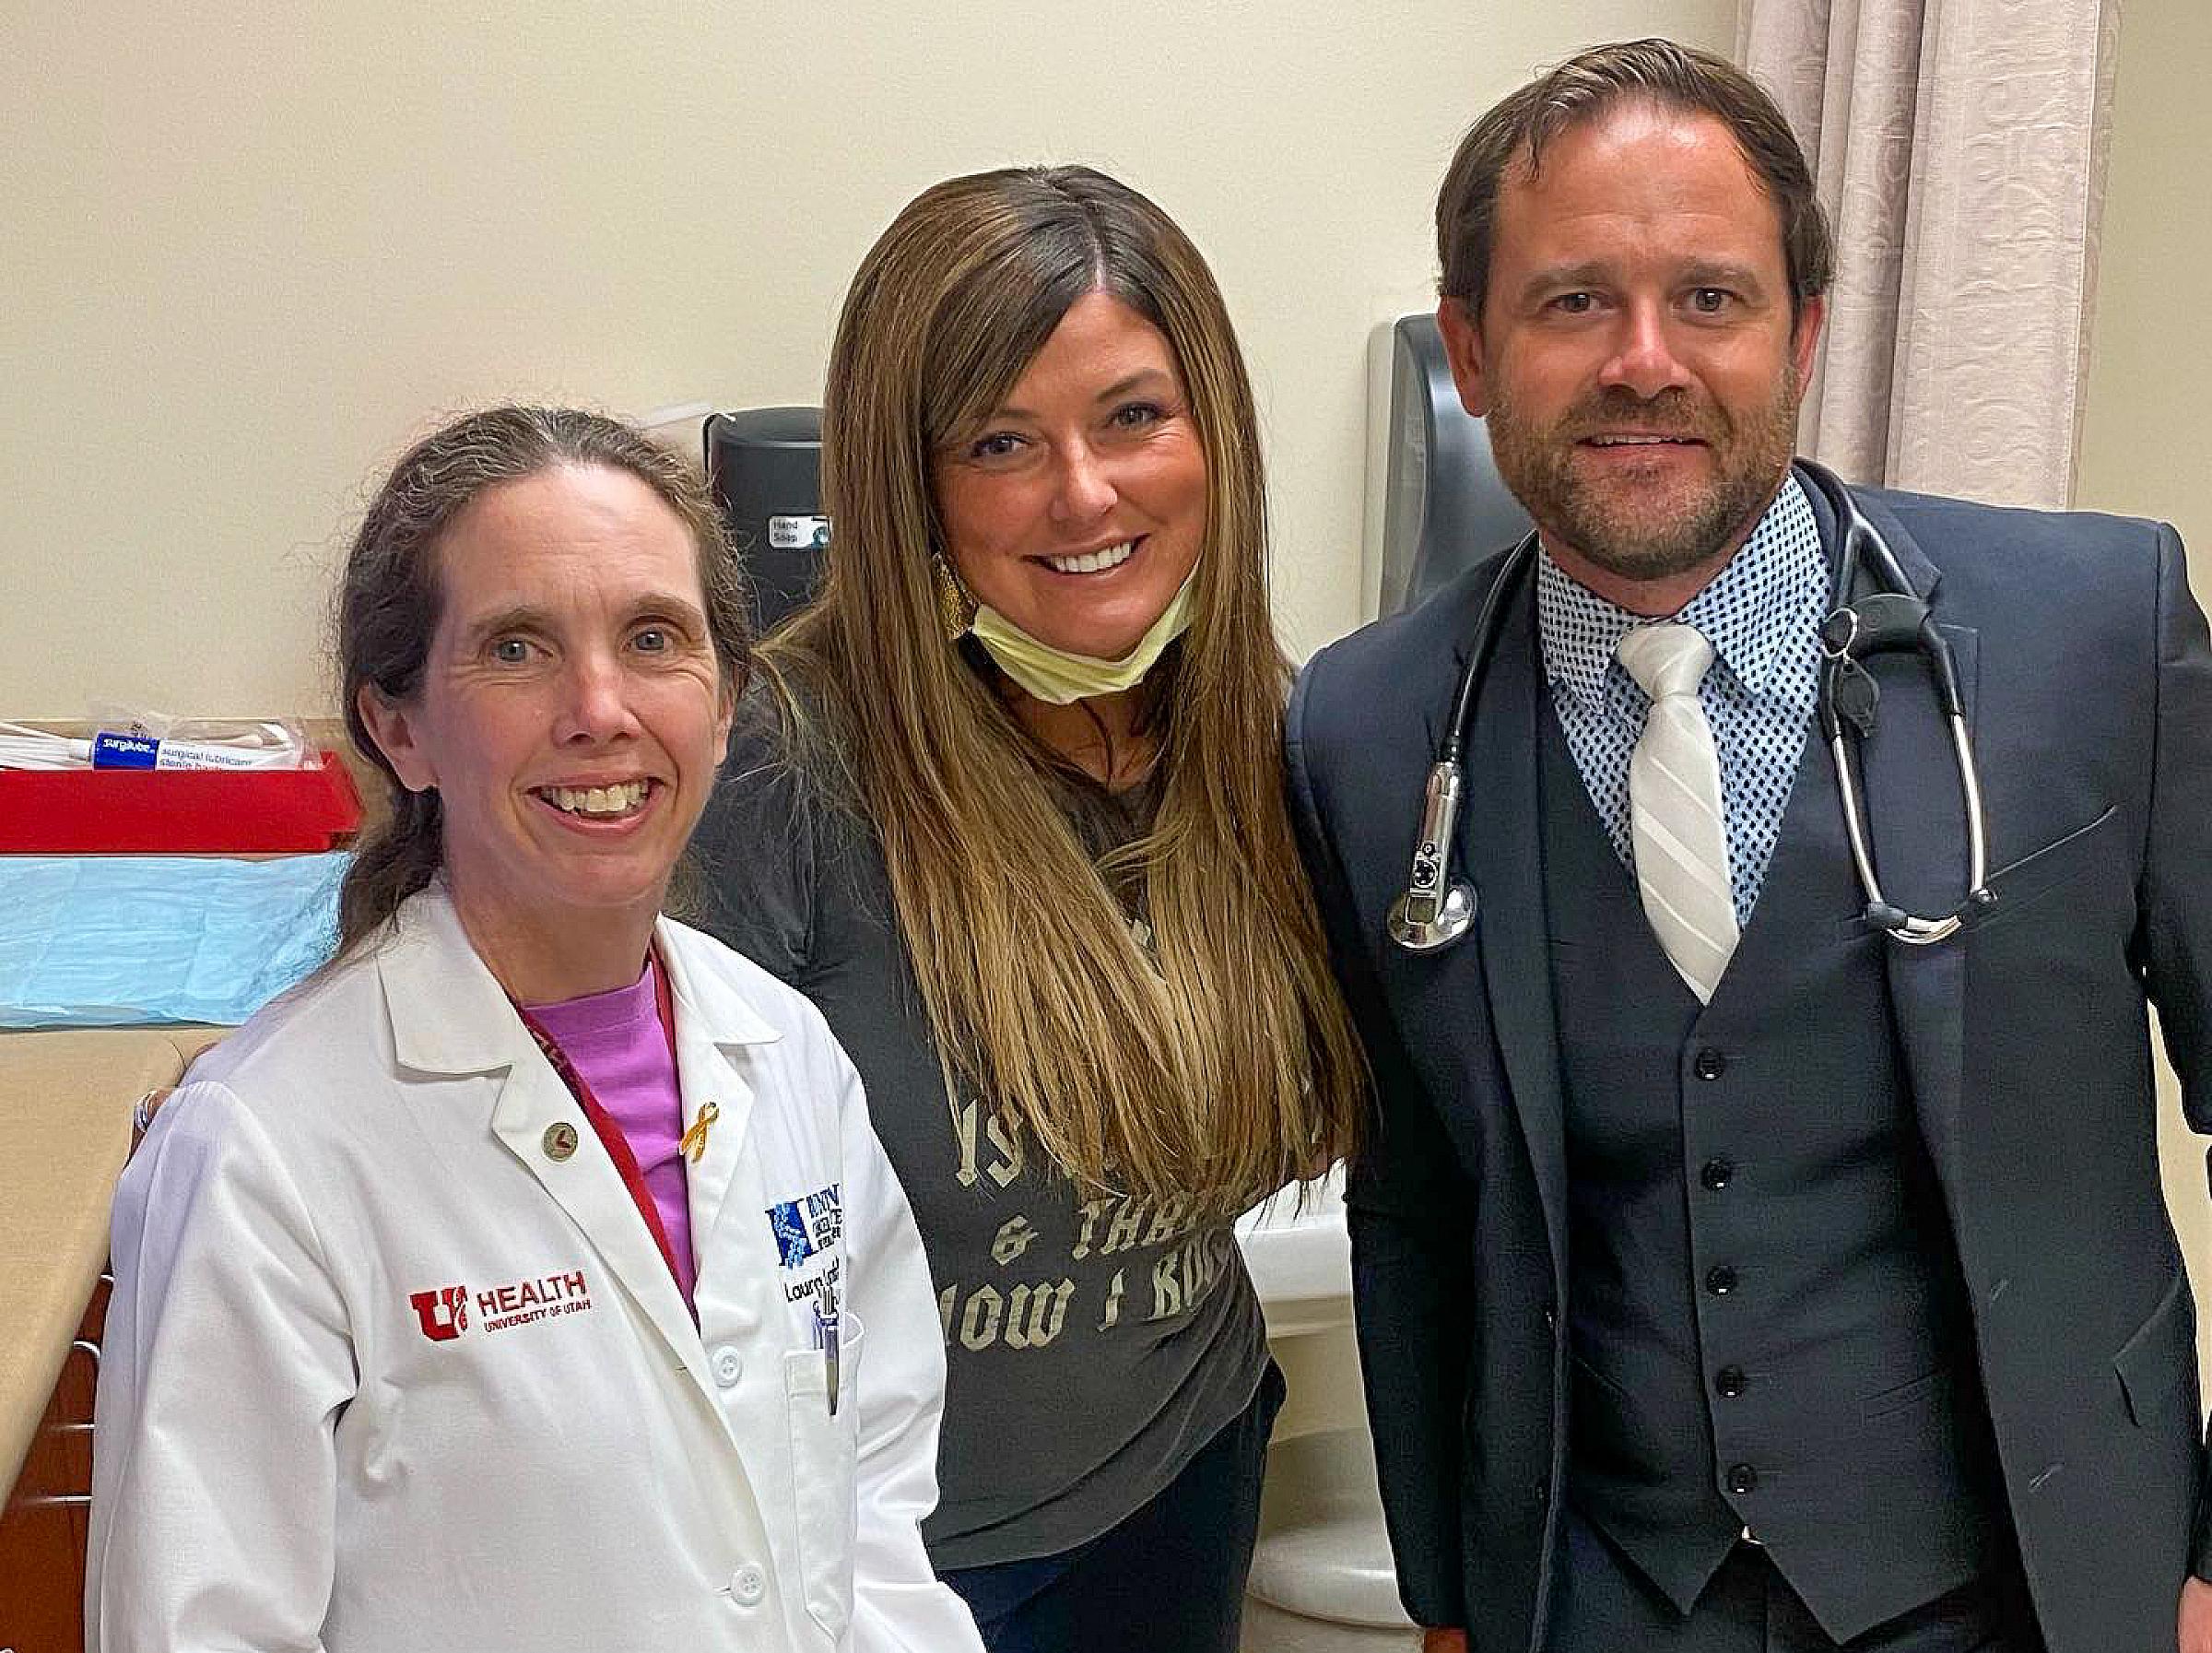 Amber with her "dream team:" Dr. Laura Lambert and Dr. Conan Kinsey at her most recent follow-up appointment.